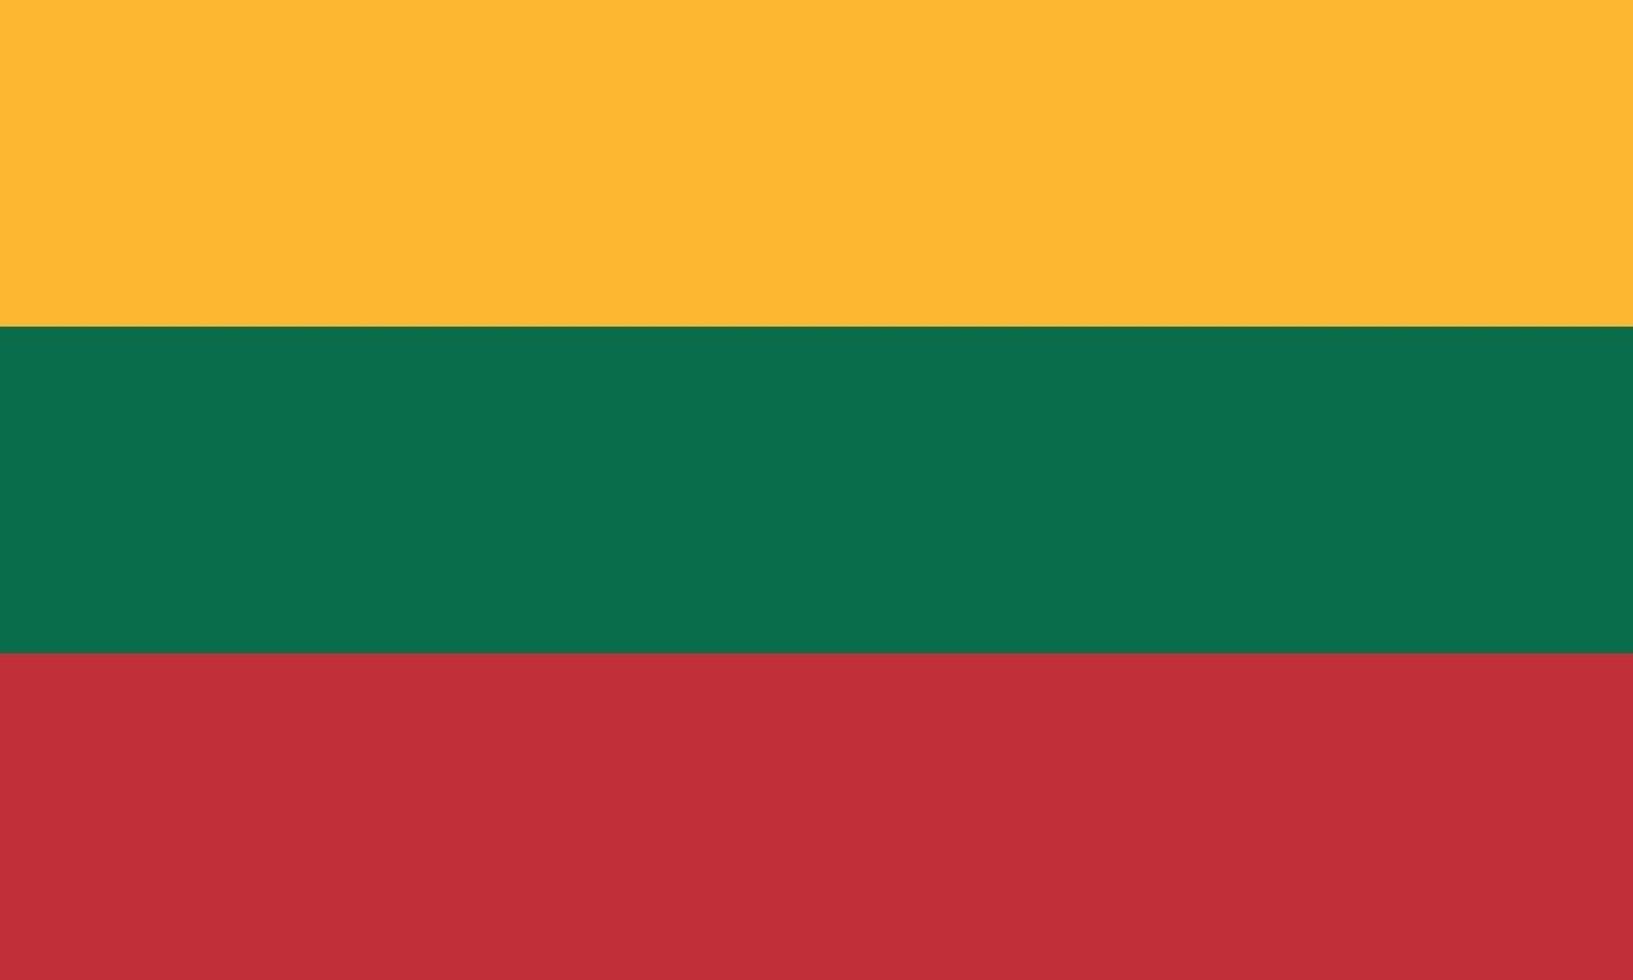 Vectorial illustration of the Lithuanian flag vector